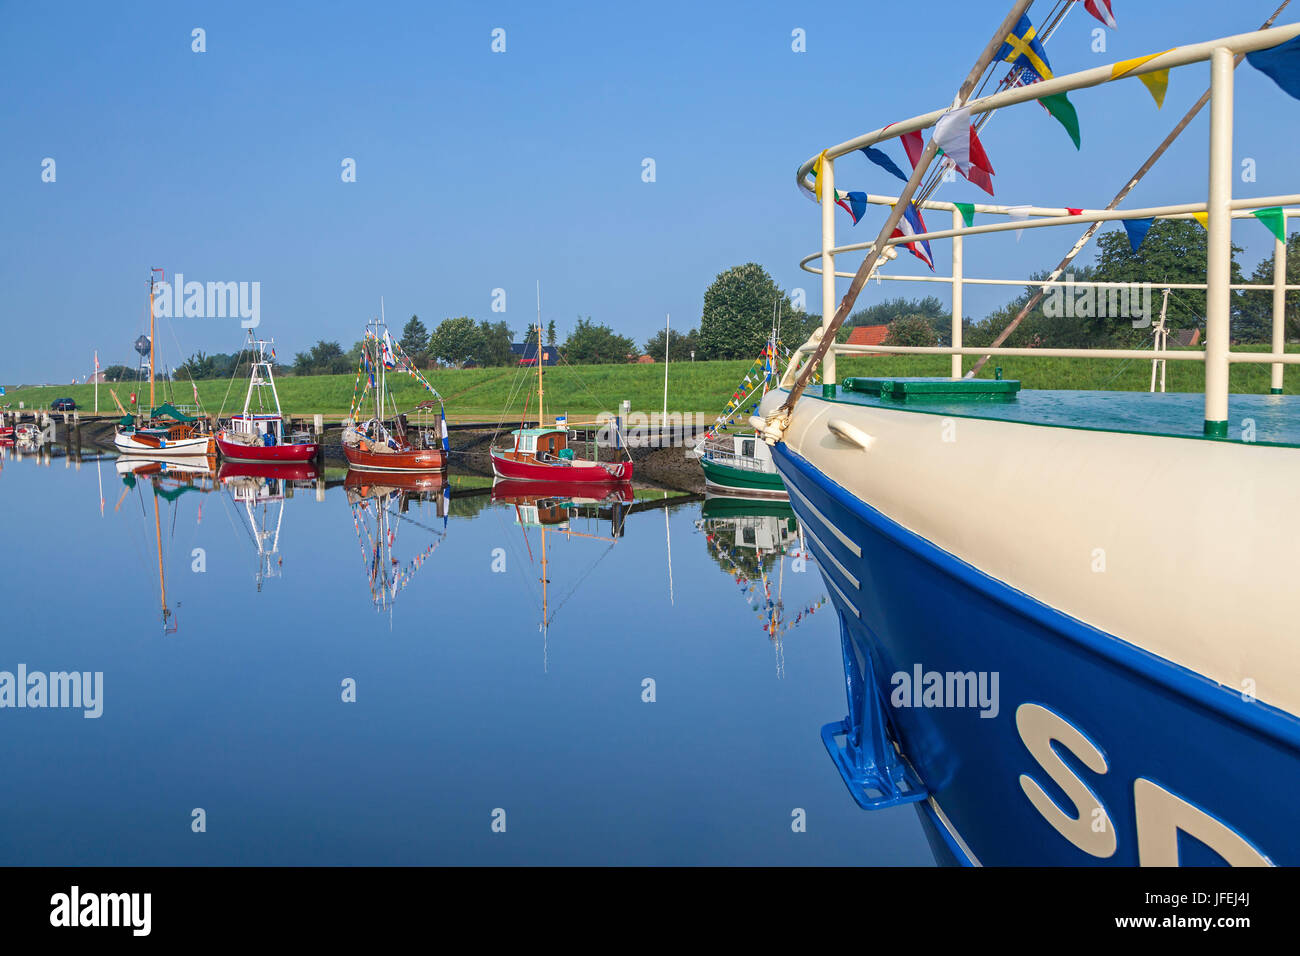 Boats in the harbour of Friedrichskoog, Ditmarsh, Schleswig - Holstein, North Germany, Germany, Europe Stock Photo